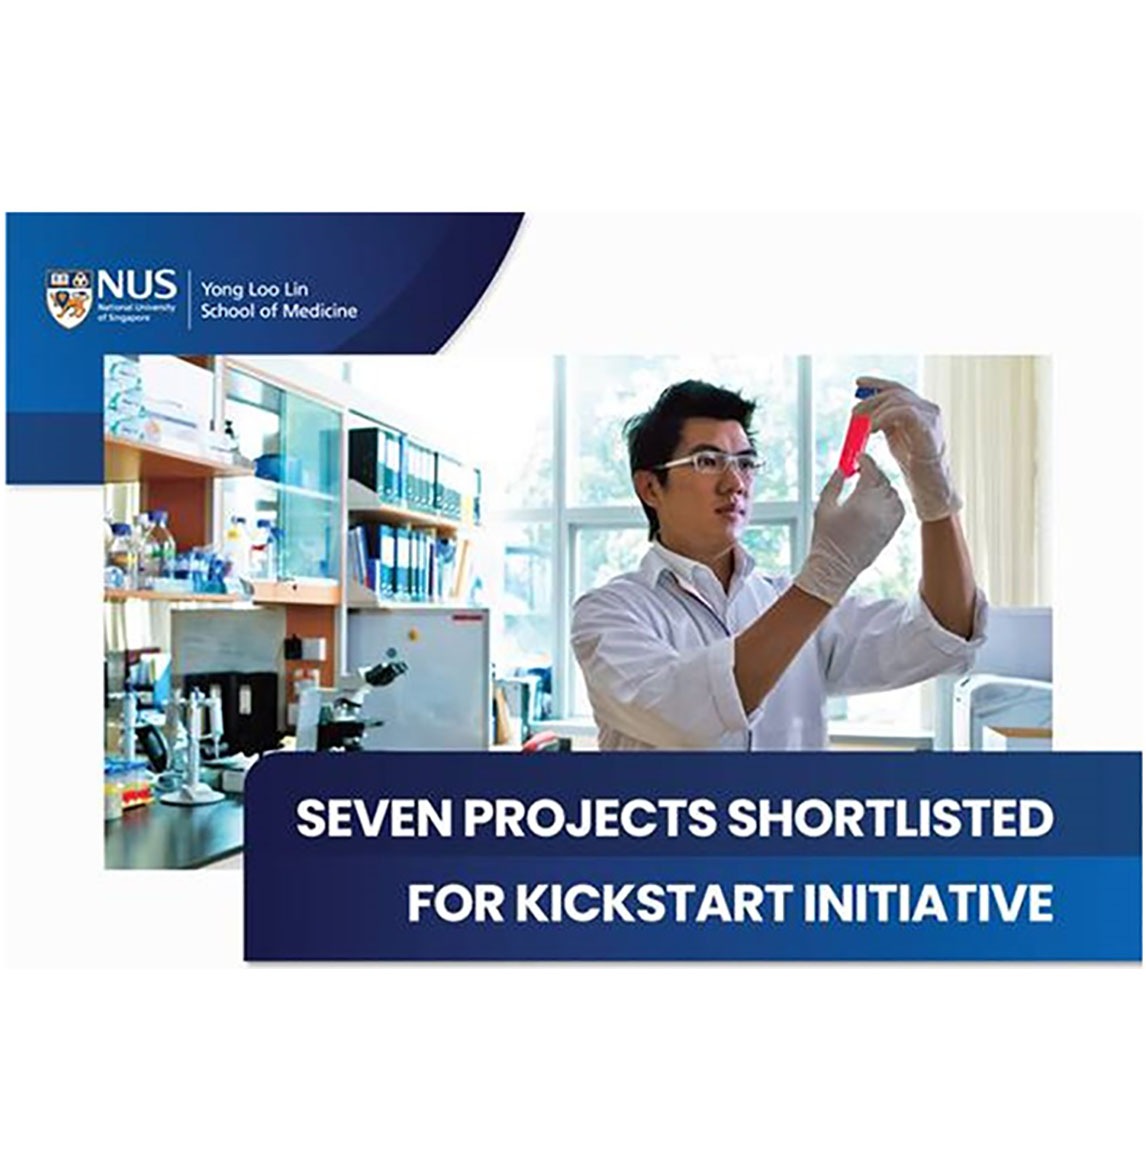 Seven projects shortlisted for Kickstart Initiative